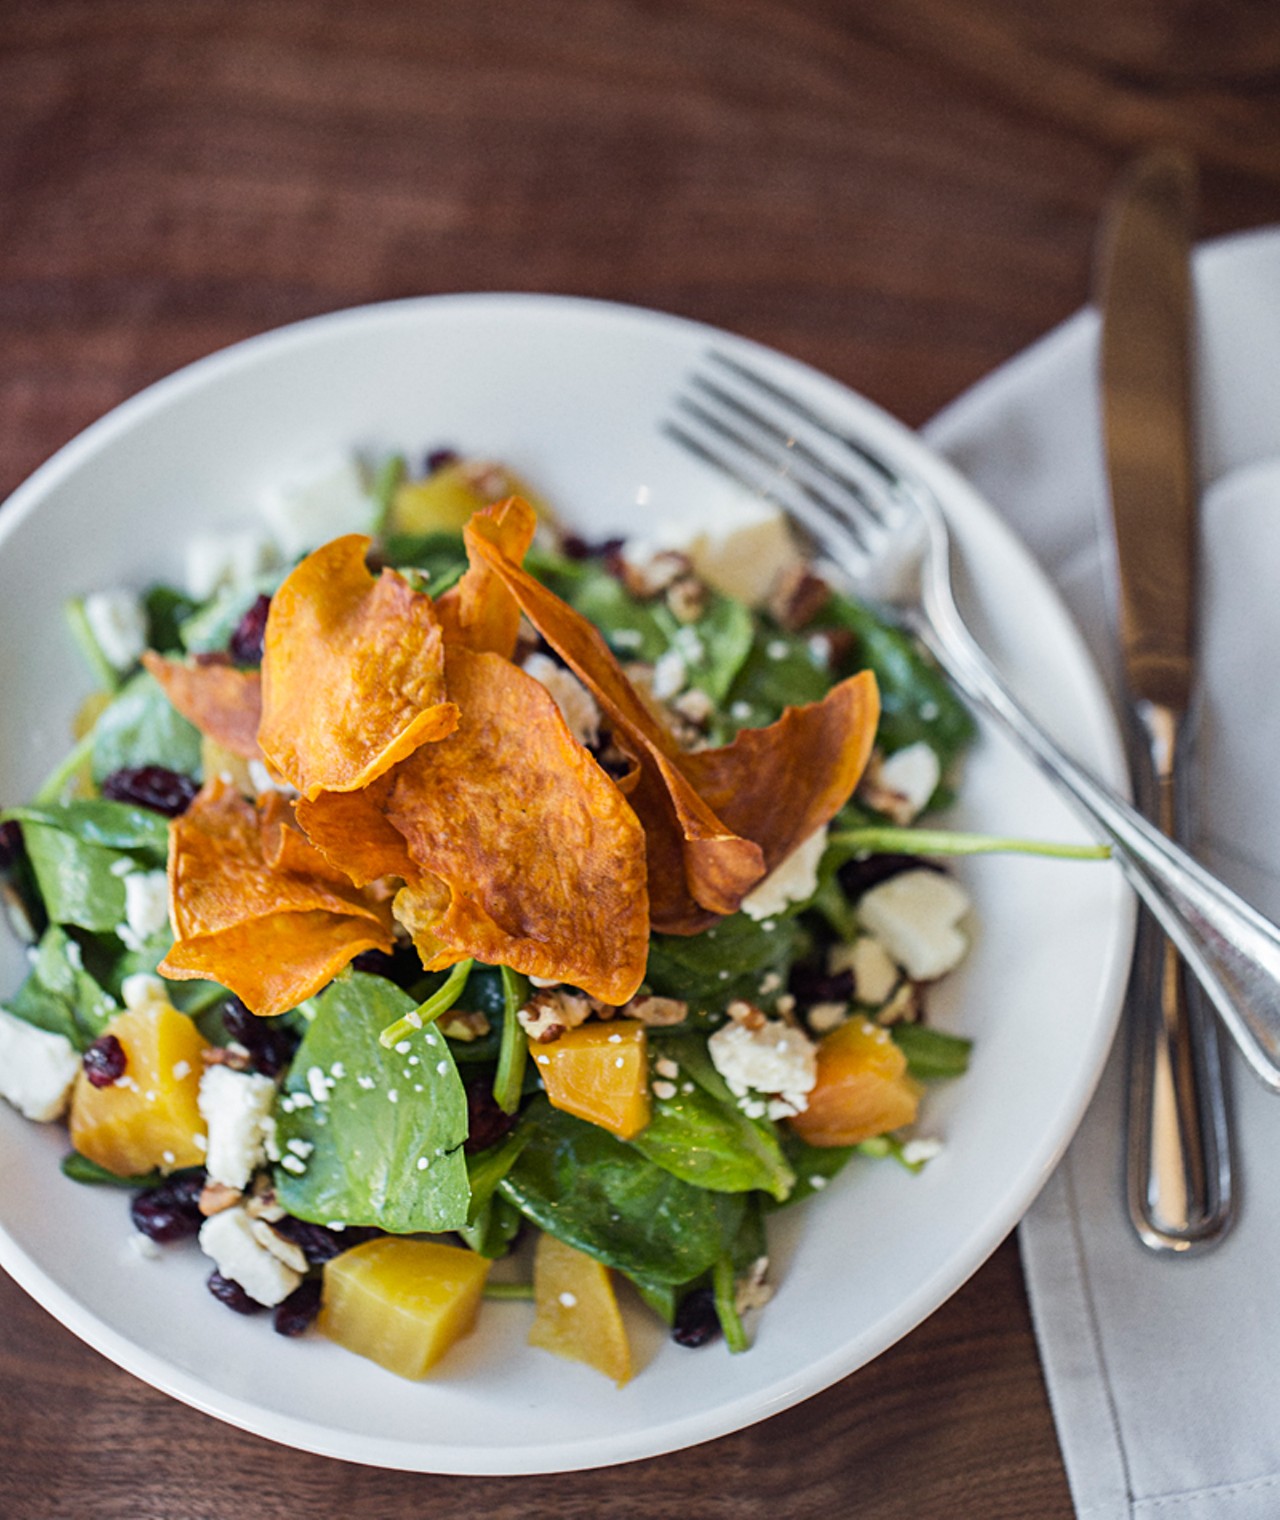 White Box's "Fall Salad" consists of baby spinach, roasted beets, pears, toasted pecans, dried cranberries, crumbled feta, sweet potato chips and a maple vinaigrette.